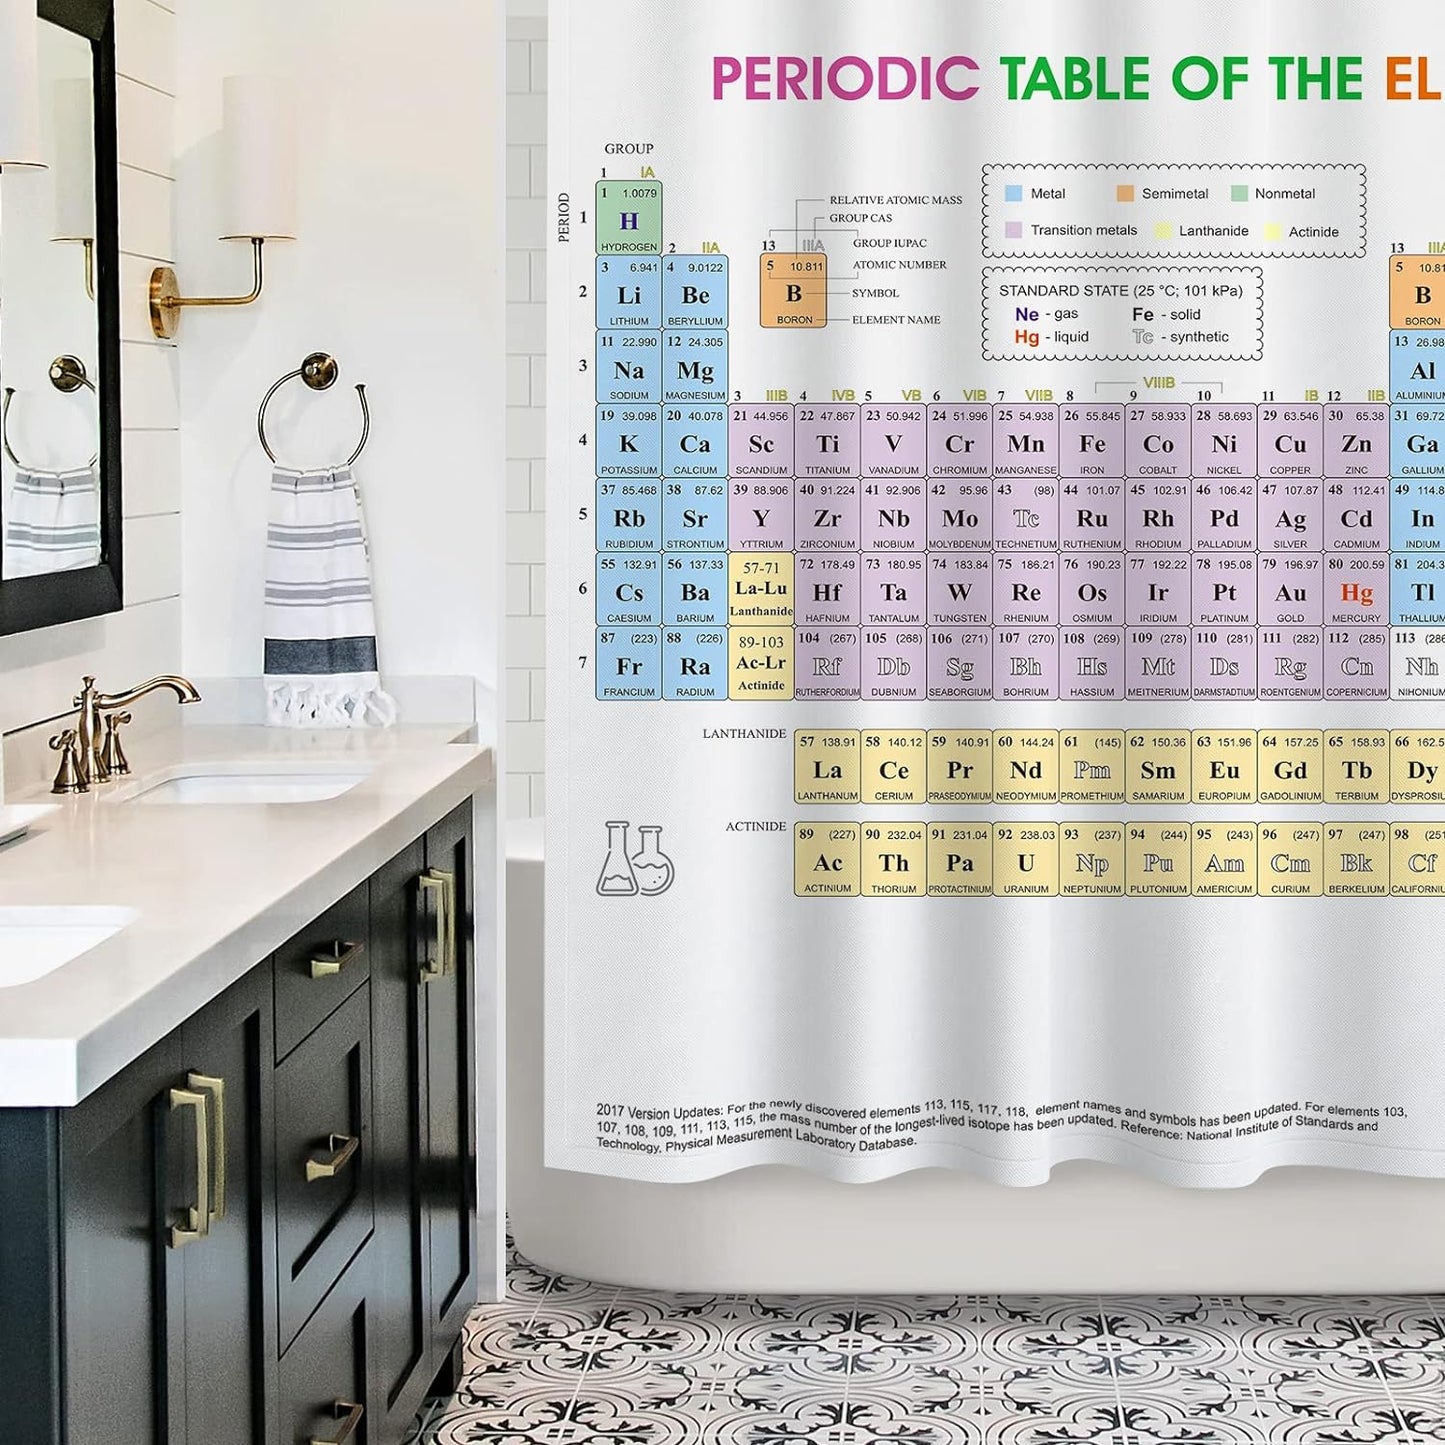 Updated Periodic Table of Elements Fabric Shower Curtains for Chemistry Students and Teacher Use as Poster.